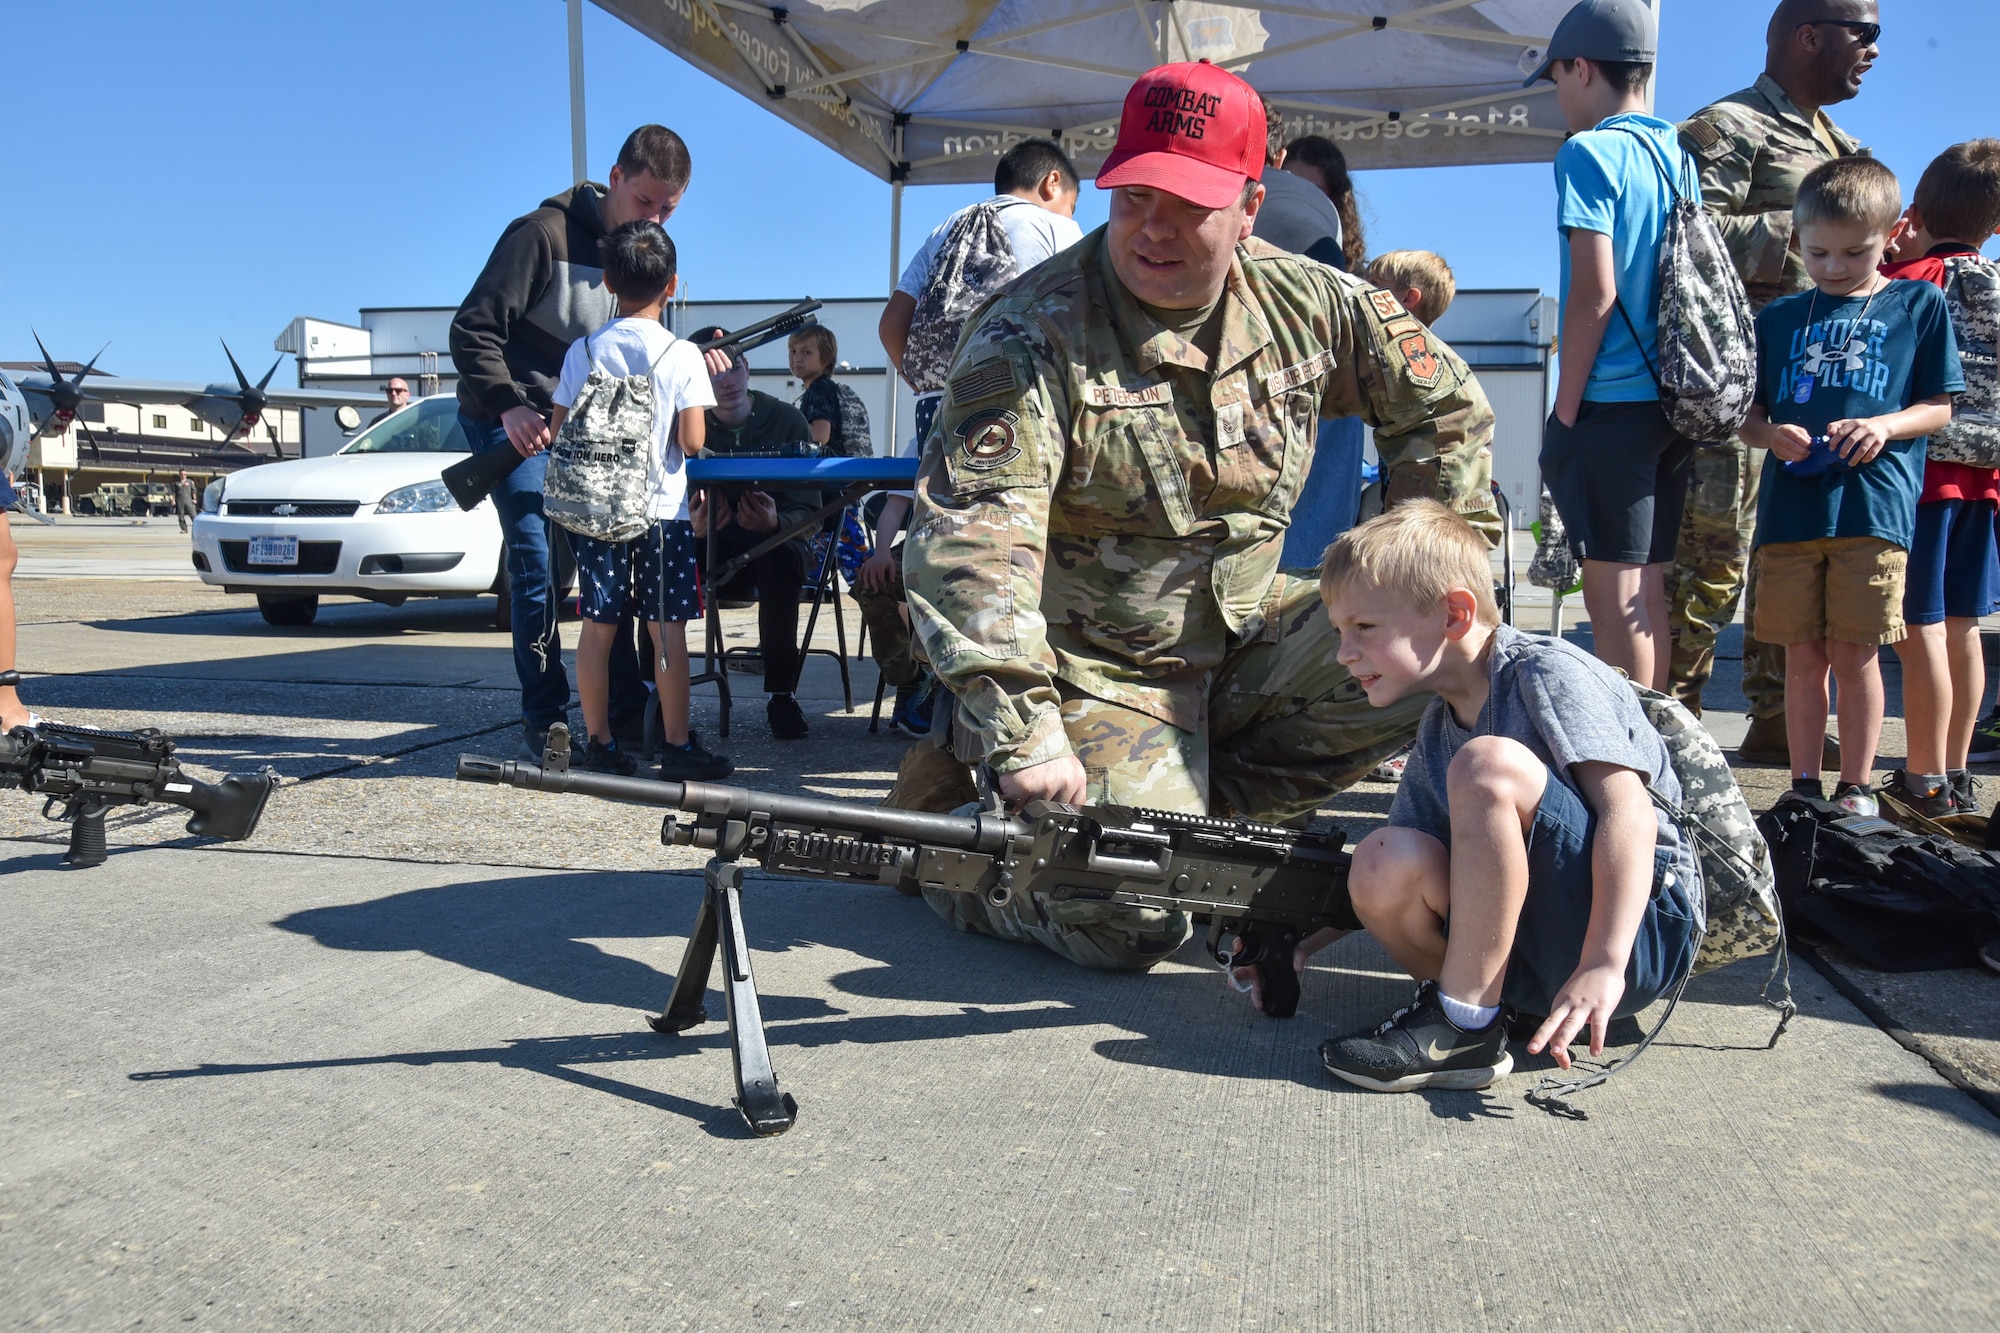 An Airman shows a kid one of the weapons used in a deployed environment